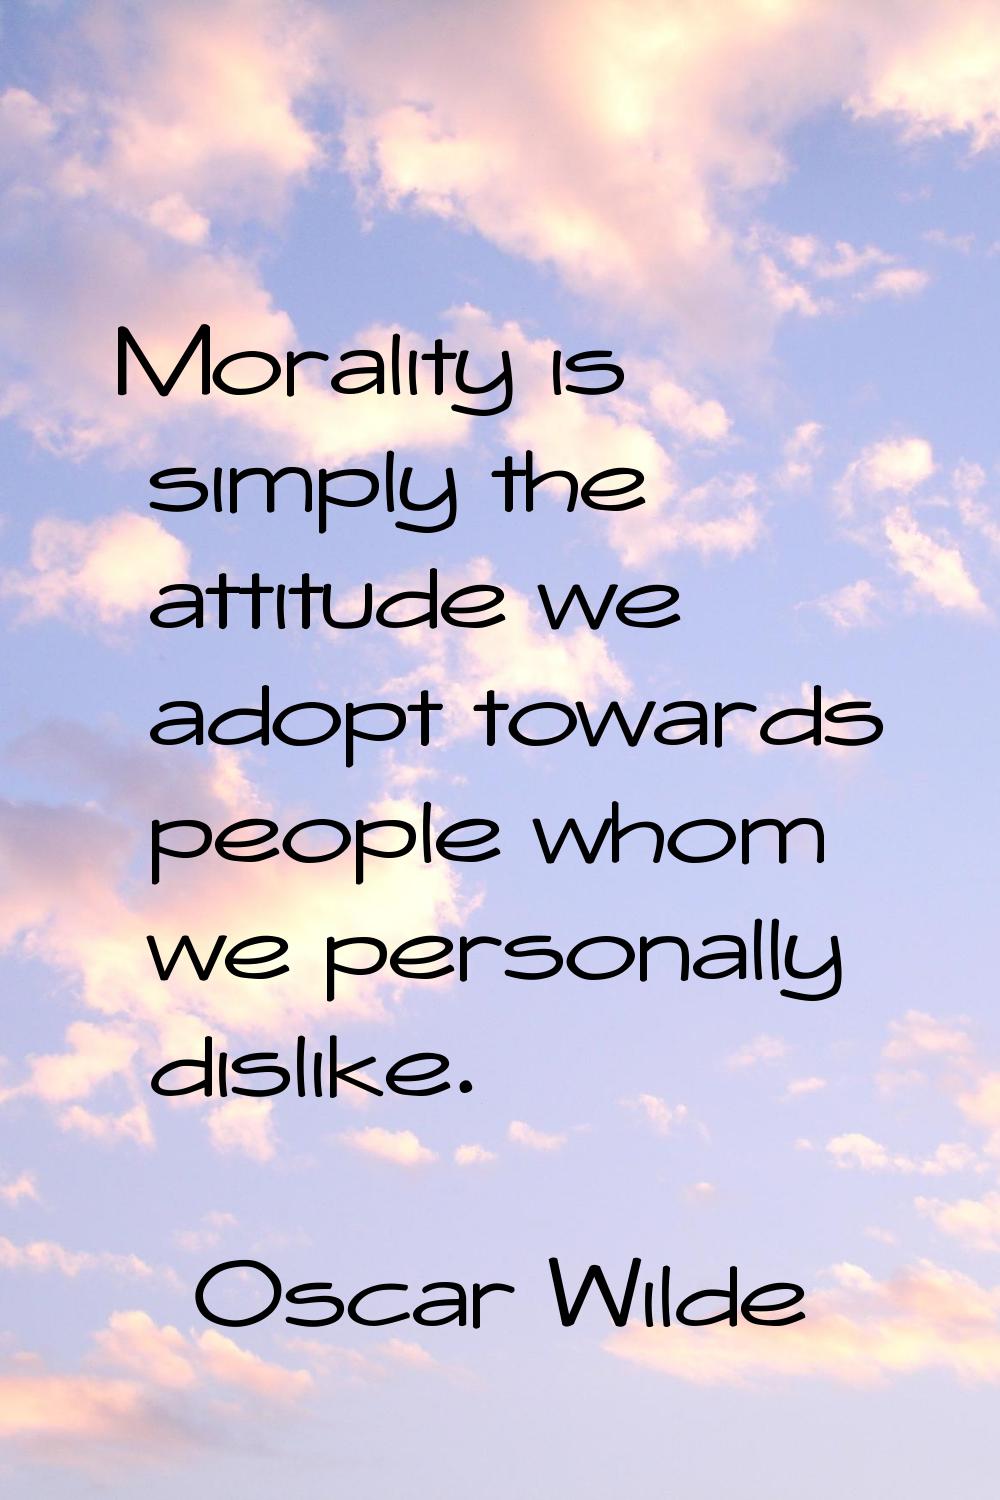 Morality is simply the attitude we adopt towards people whom we personally dislike.